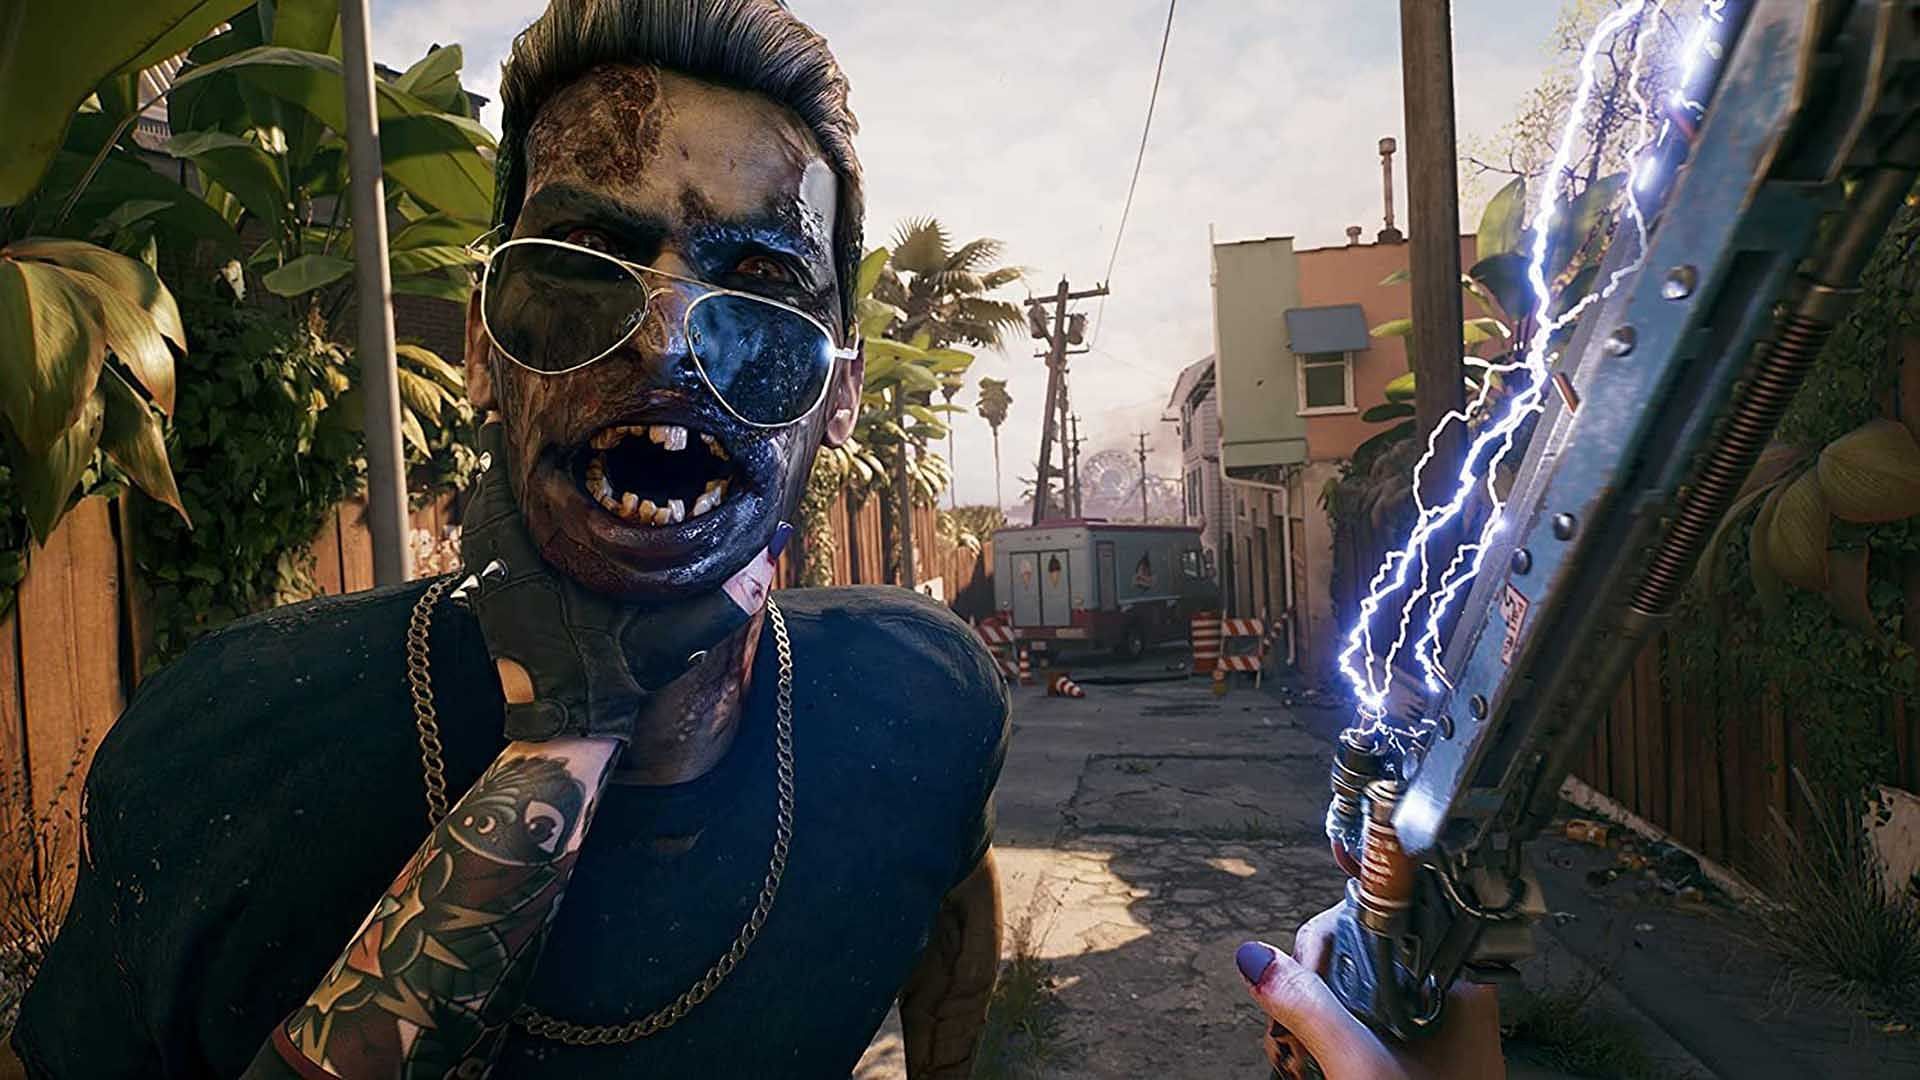 An up close look at a Zombie from Dead Island 2 (Image via Deep Silver)